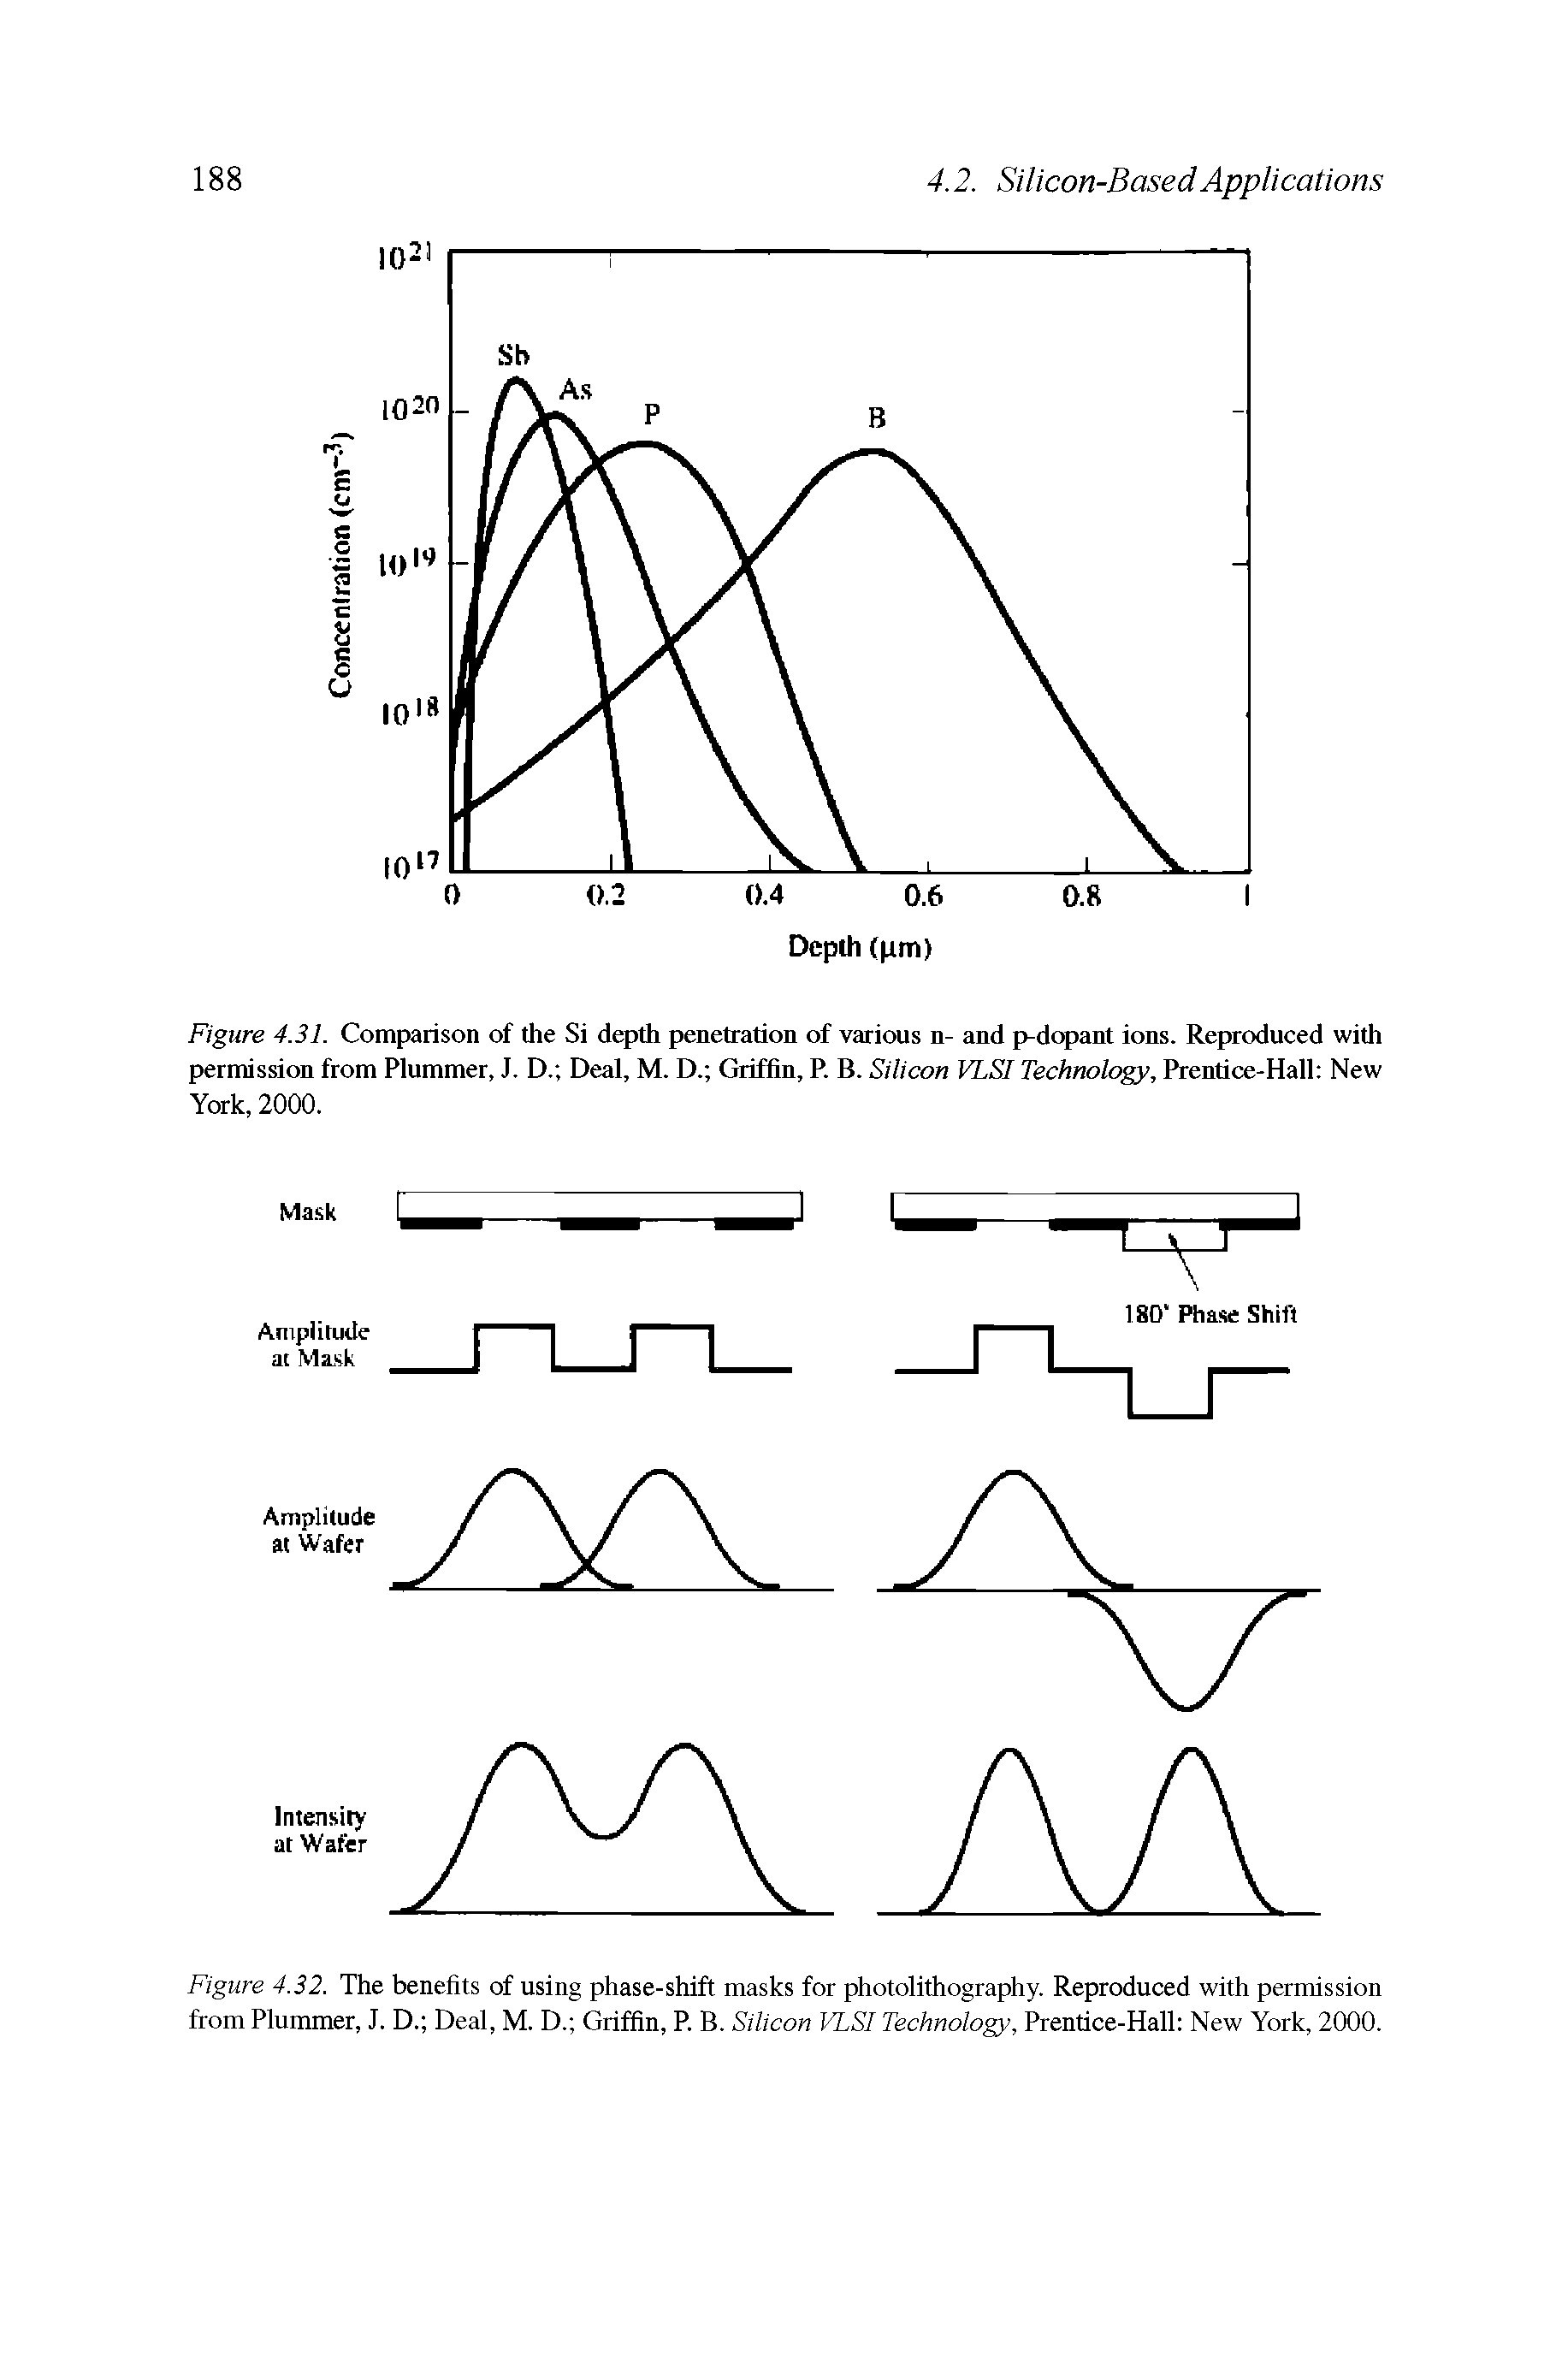 Figure 4.32. The benefits of using phase-shift masks for photolithography. Reproduced with permission from Plummer, J. D. Deal, M. D. Griffin, P. B. Silicon VLSI Technology, Prentice-Hall New York, 2000.